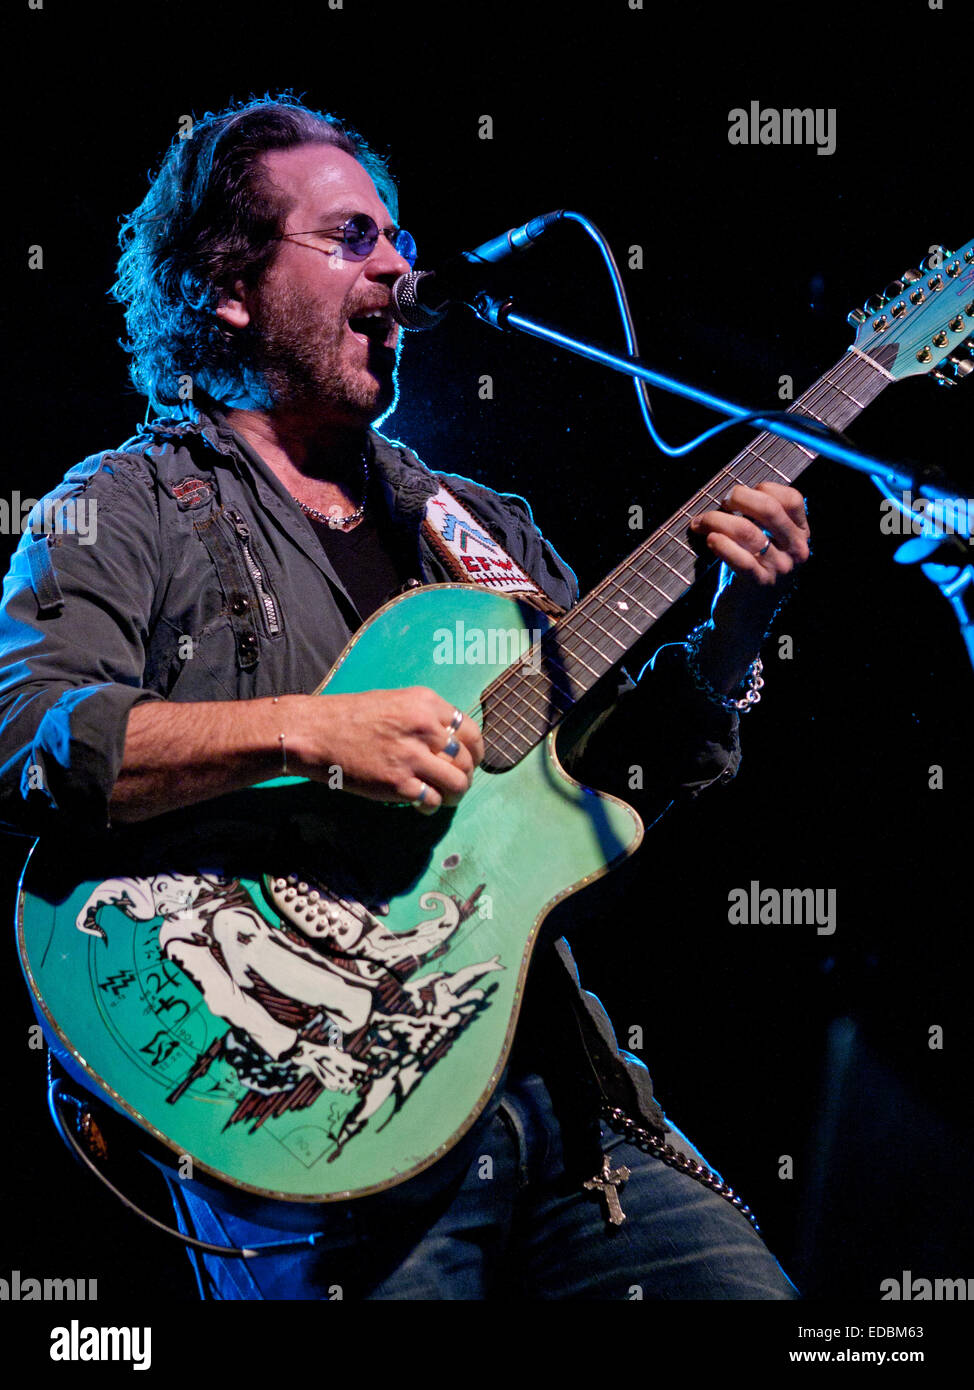 Kip Winger acoustic concert at Club202, Budapest, Hungary Sept 26, 2012 Stock Photo